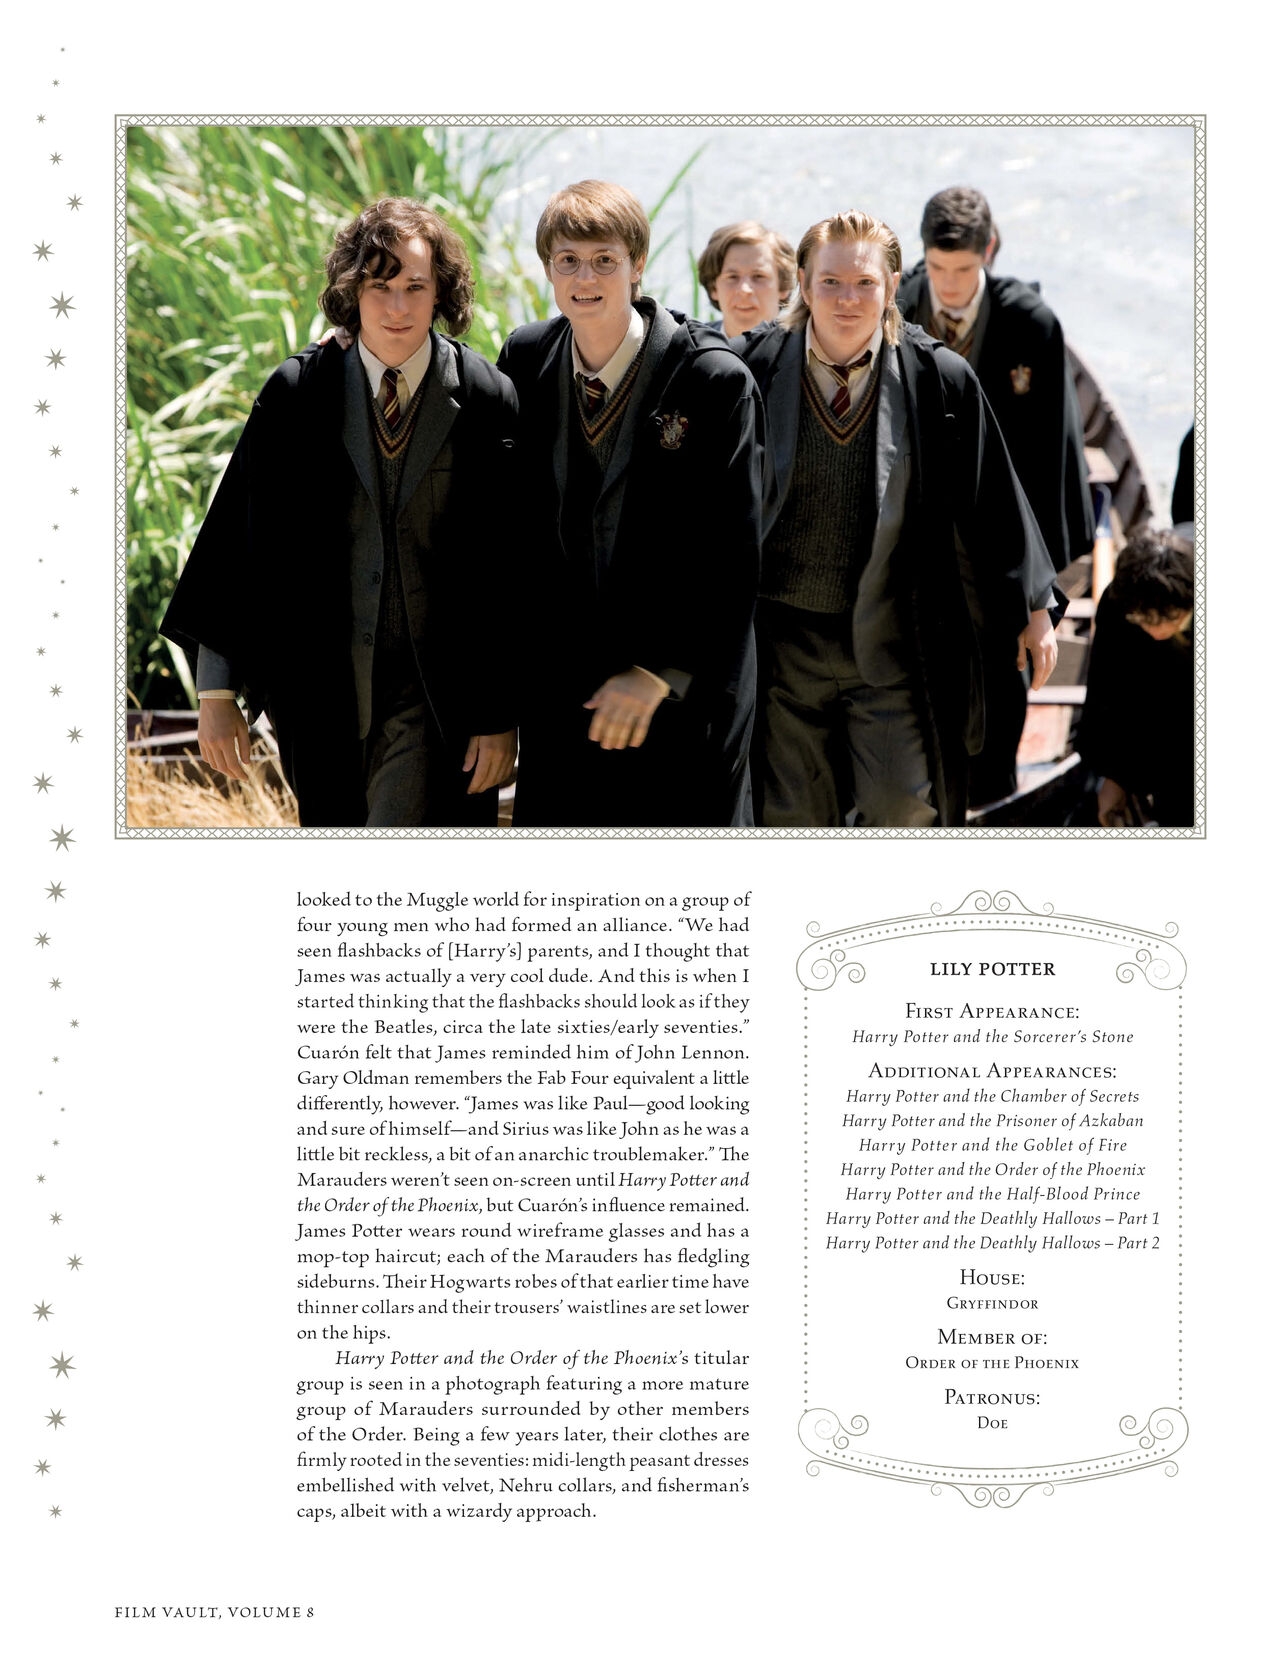 Harry Potter - Film Vault v08 - The Order of the Phoenix and Dark Forces 14